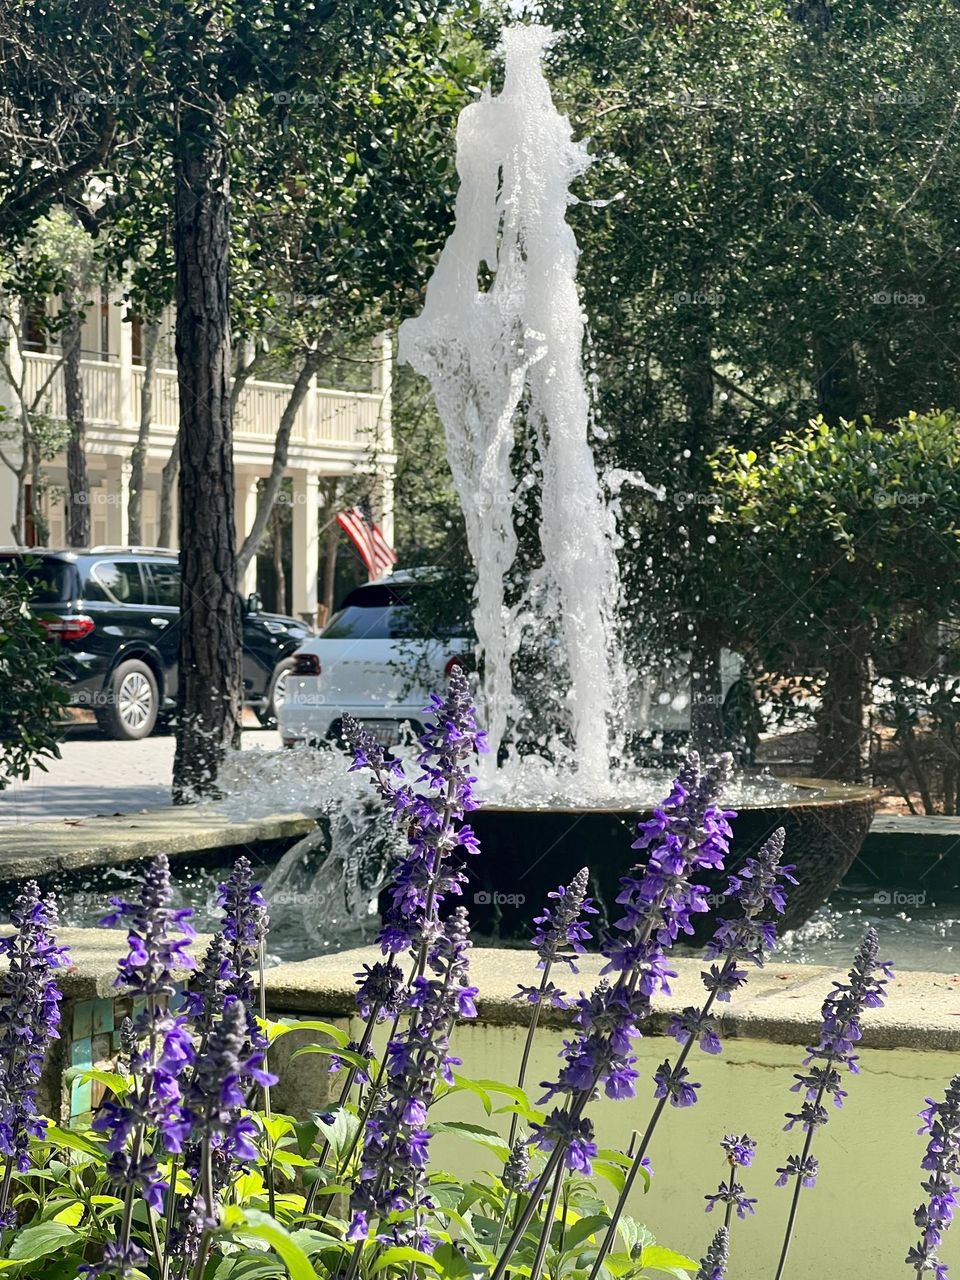 Sunny day in an urban park. Spikes of purple flowers in the foreground, trees and a bubbling water fountain behind, and background is a city street featuring cars, buildings and a US flag.